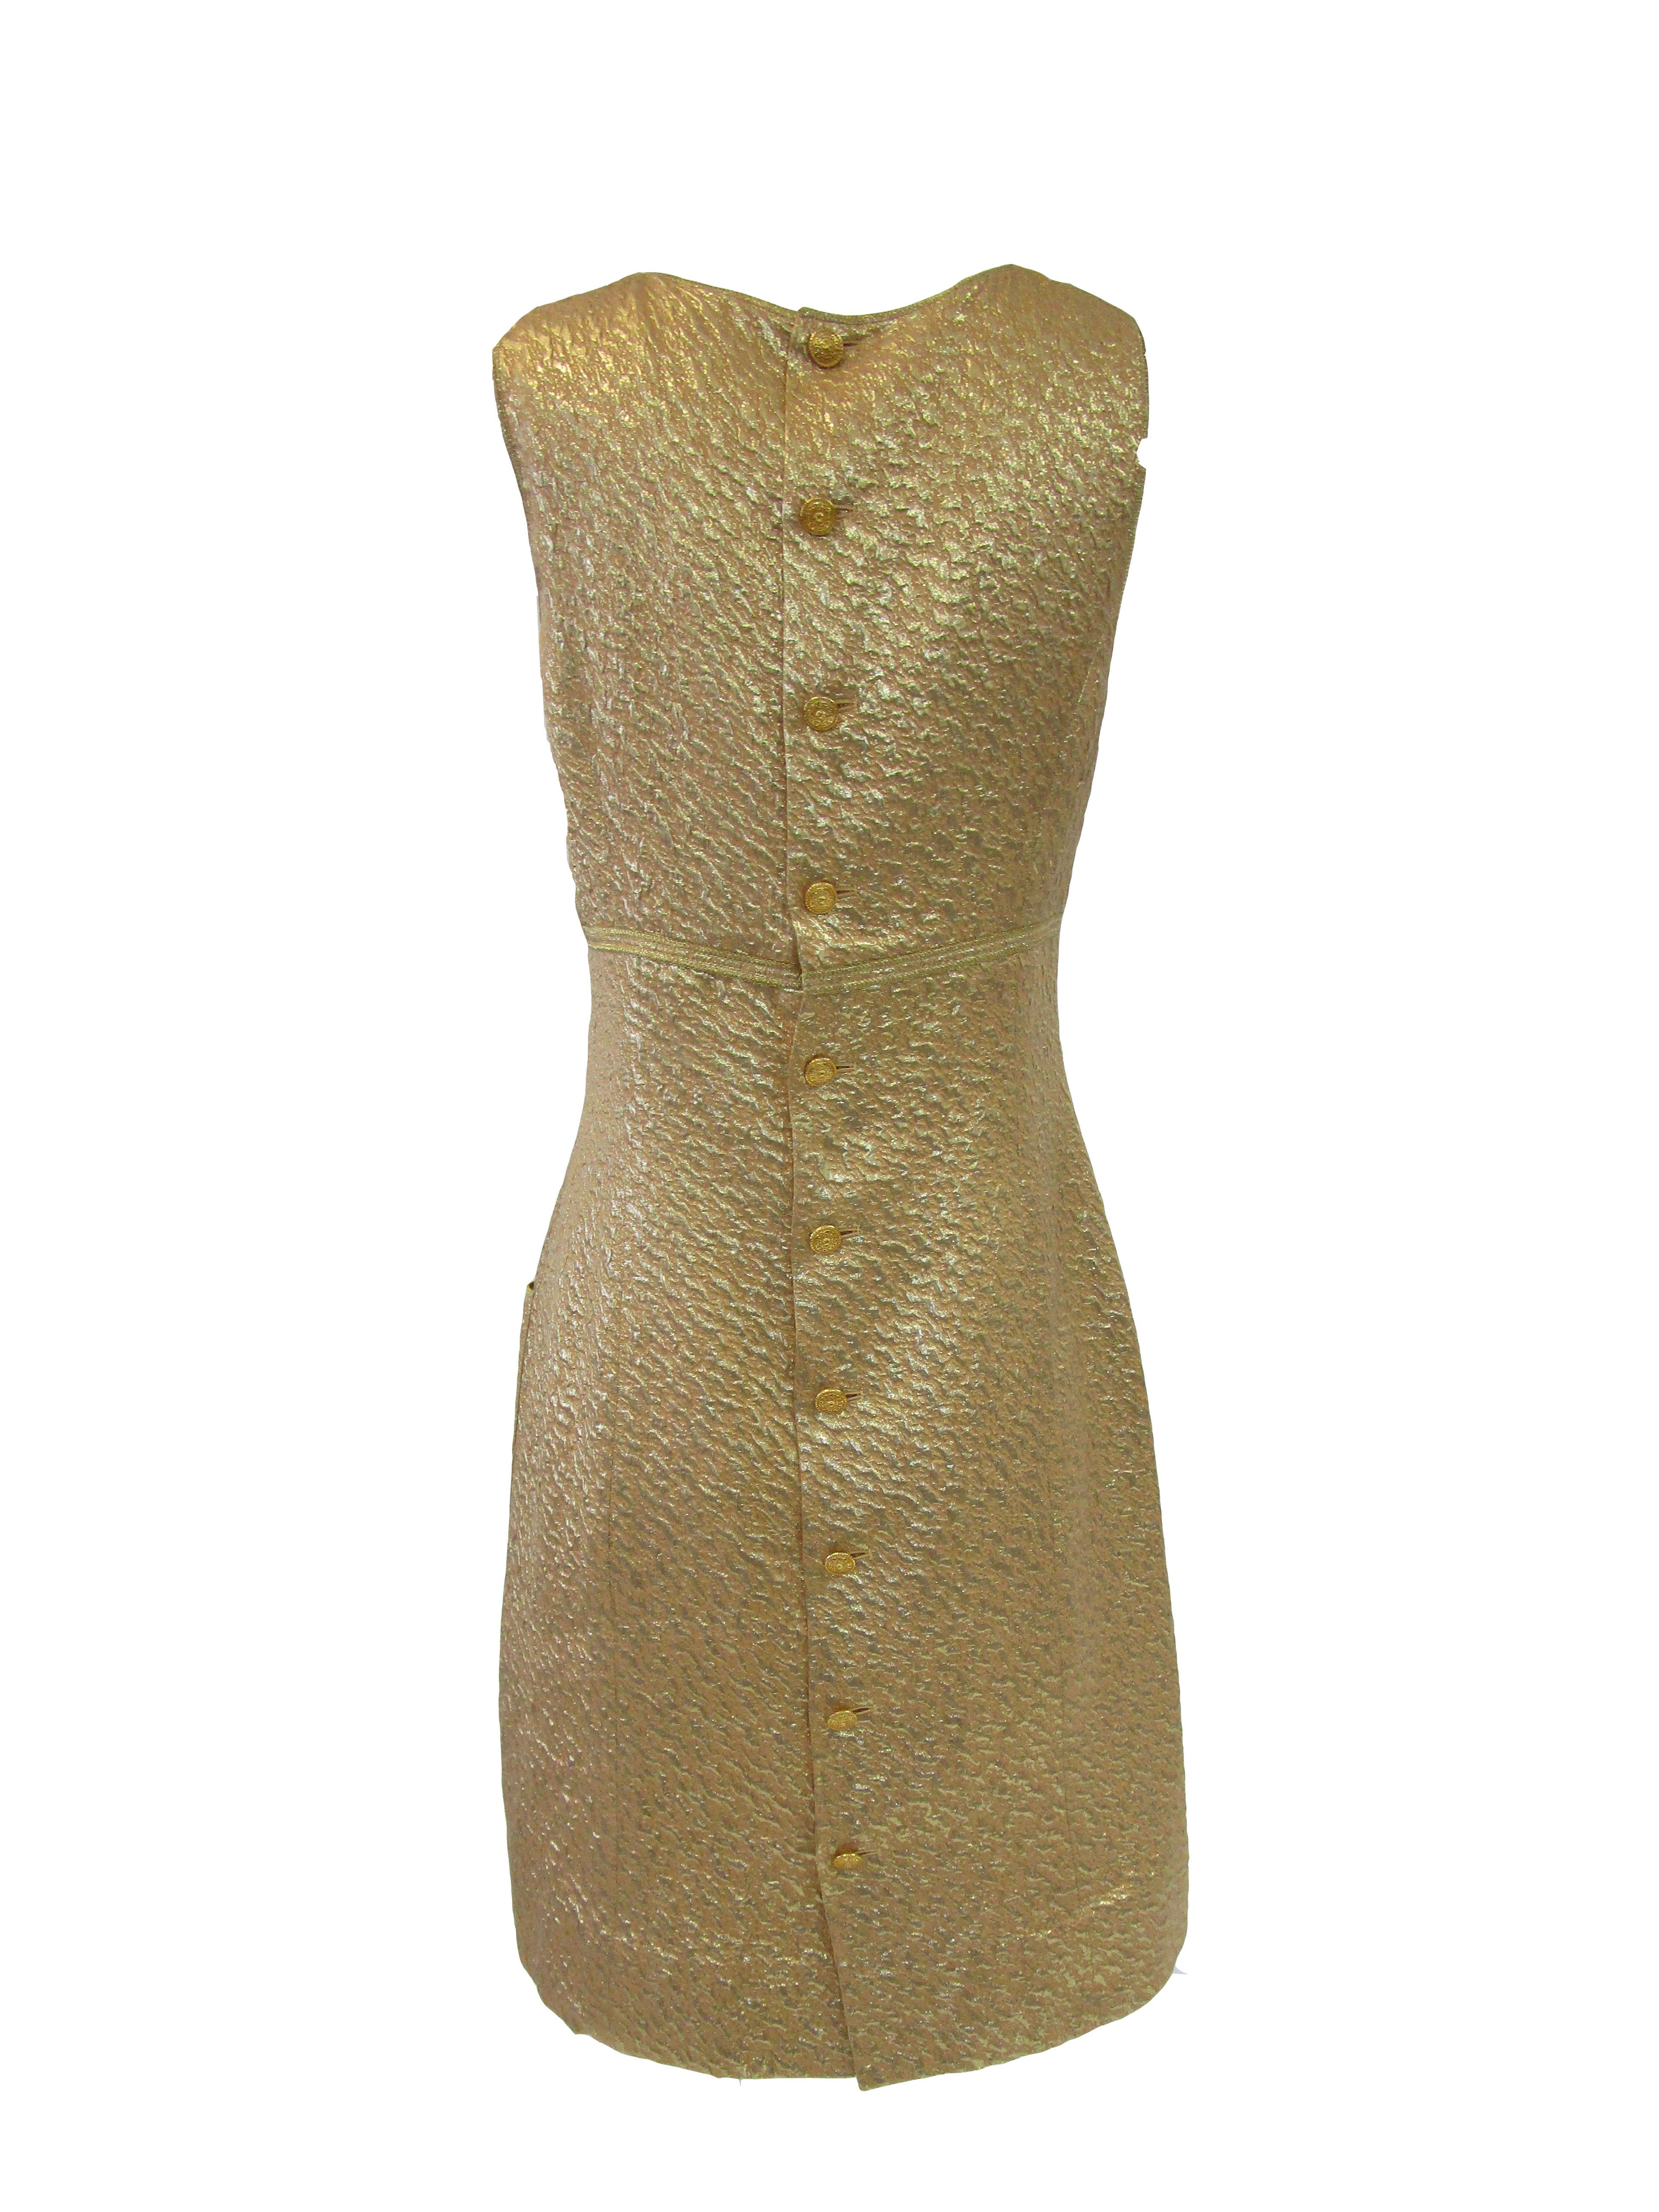 Women's 1996 Chanel by Lagerfeld Golden Boucle and Lame Shift Dress and Coat For Sale